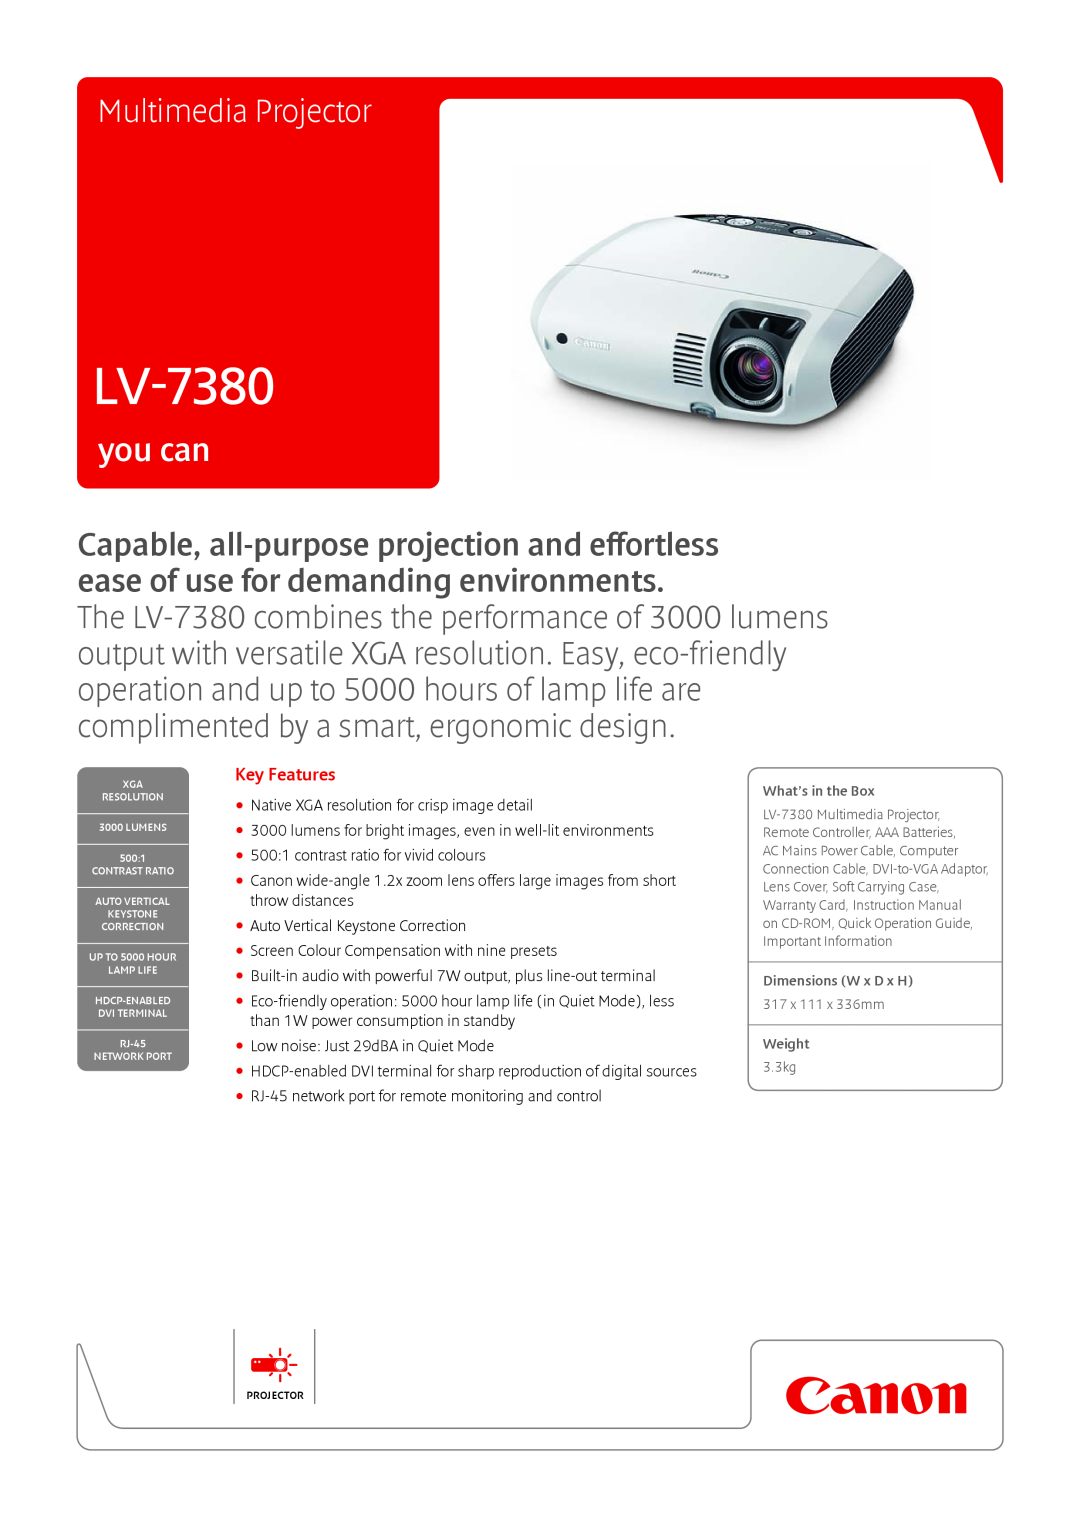 Canon LV-7380 warranty you can, Multimedia Projector, Key Features 